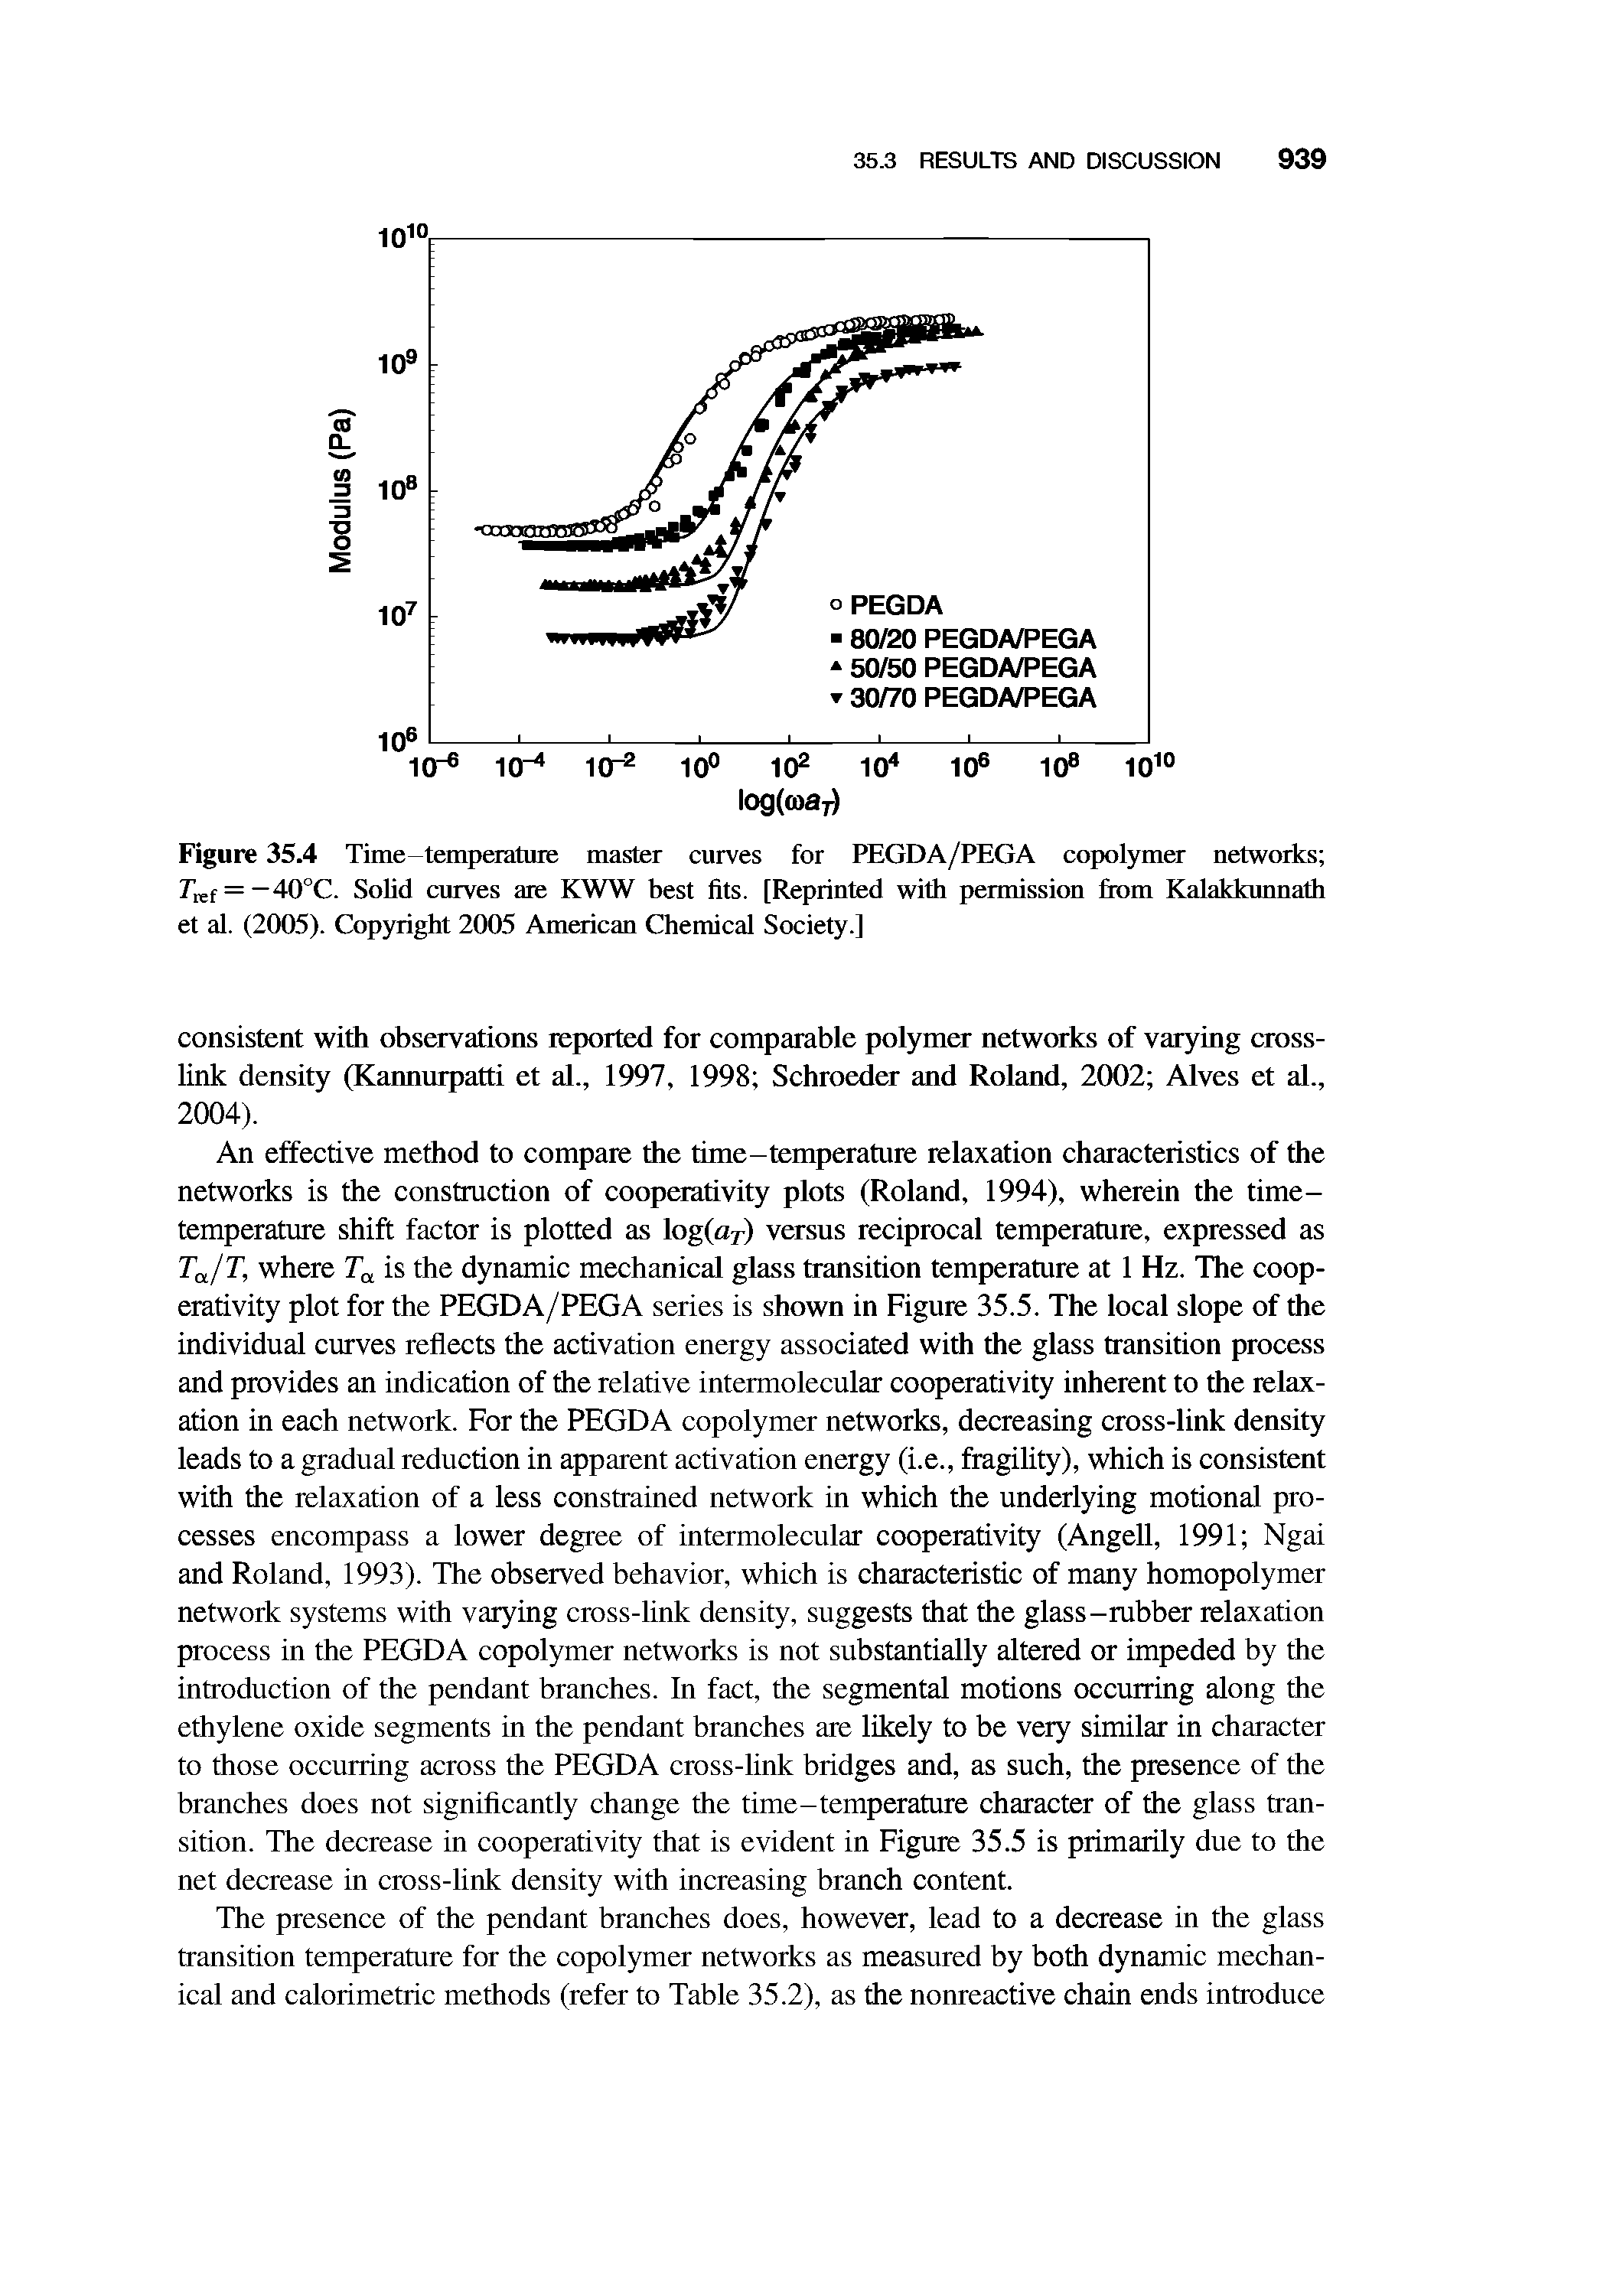 Figure 35.4 Time temperature master curves for PEGDA/PEGA copolymer networks T f = —40°C. Solid curves are KWW best fits. [Reprinted with permission from Kalakkunnath et al. (2005). Copyright 2005 American Chemical Society.]...